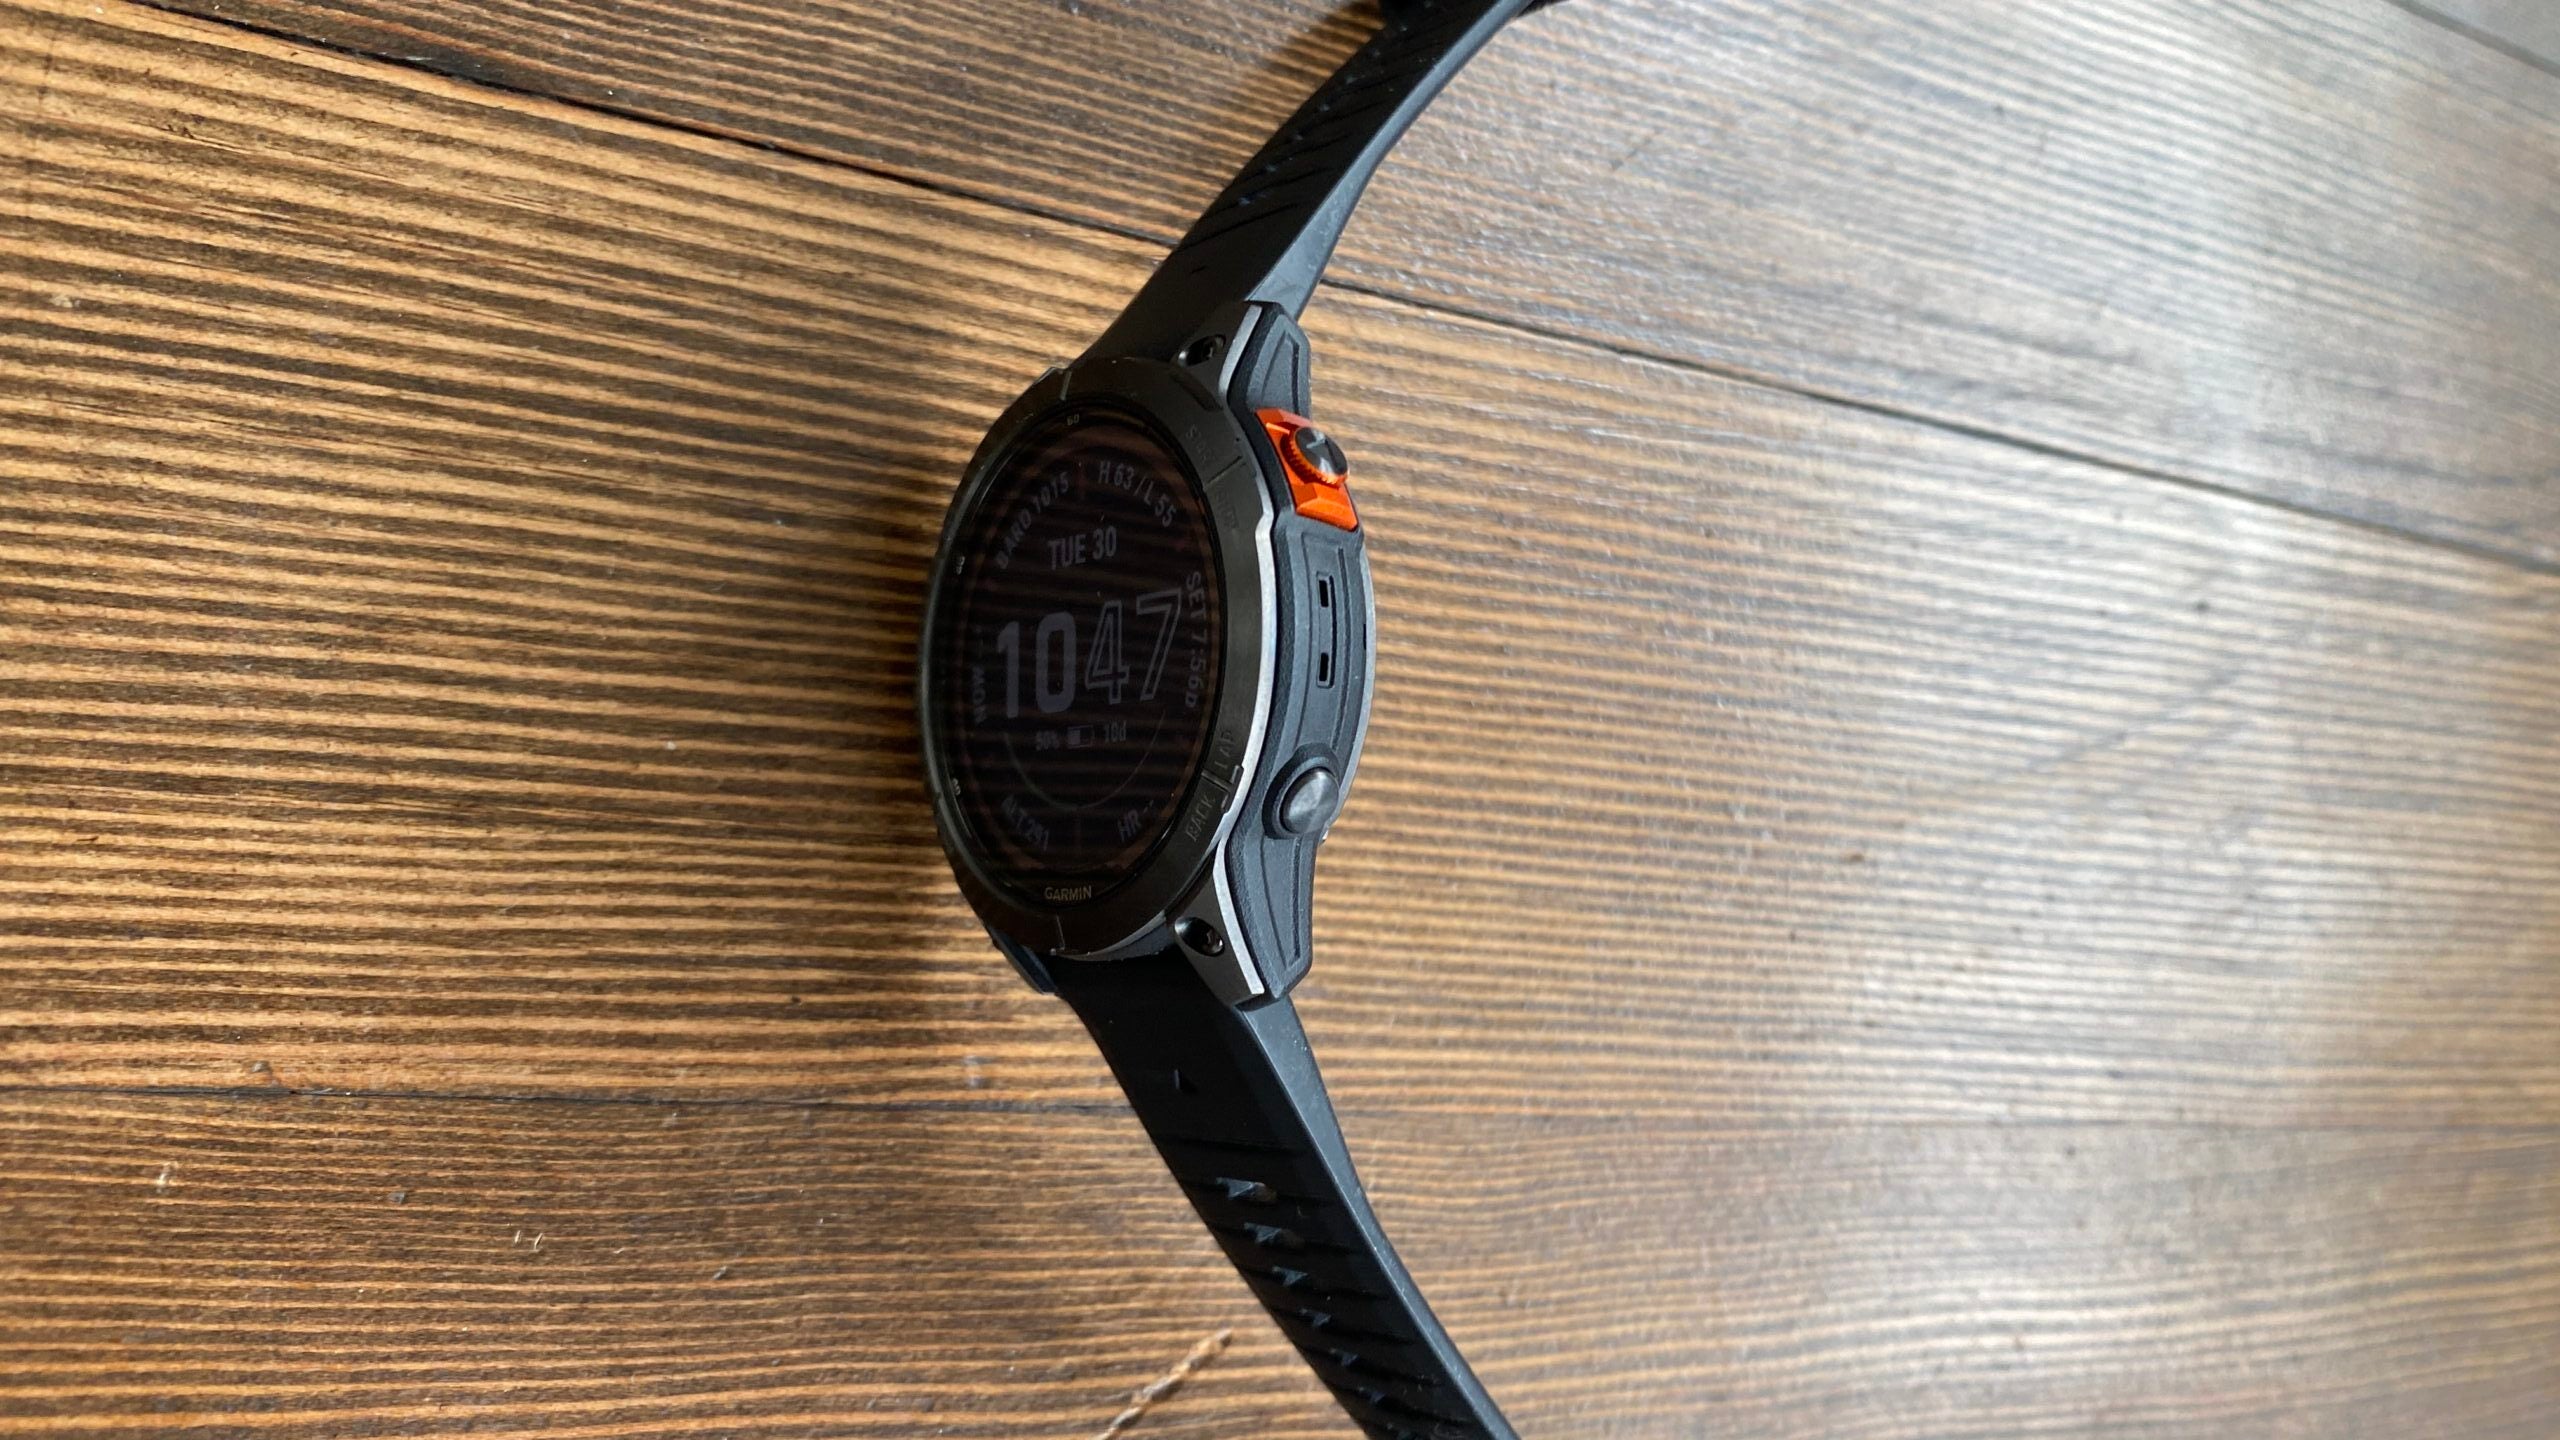 Side view of the Garmin Fenix 7 Pro Reviewed for this article.